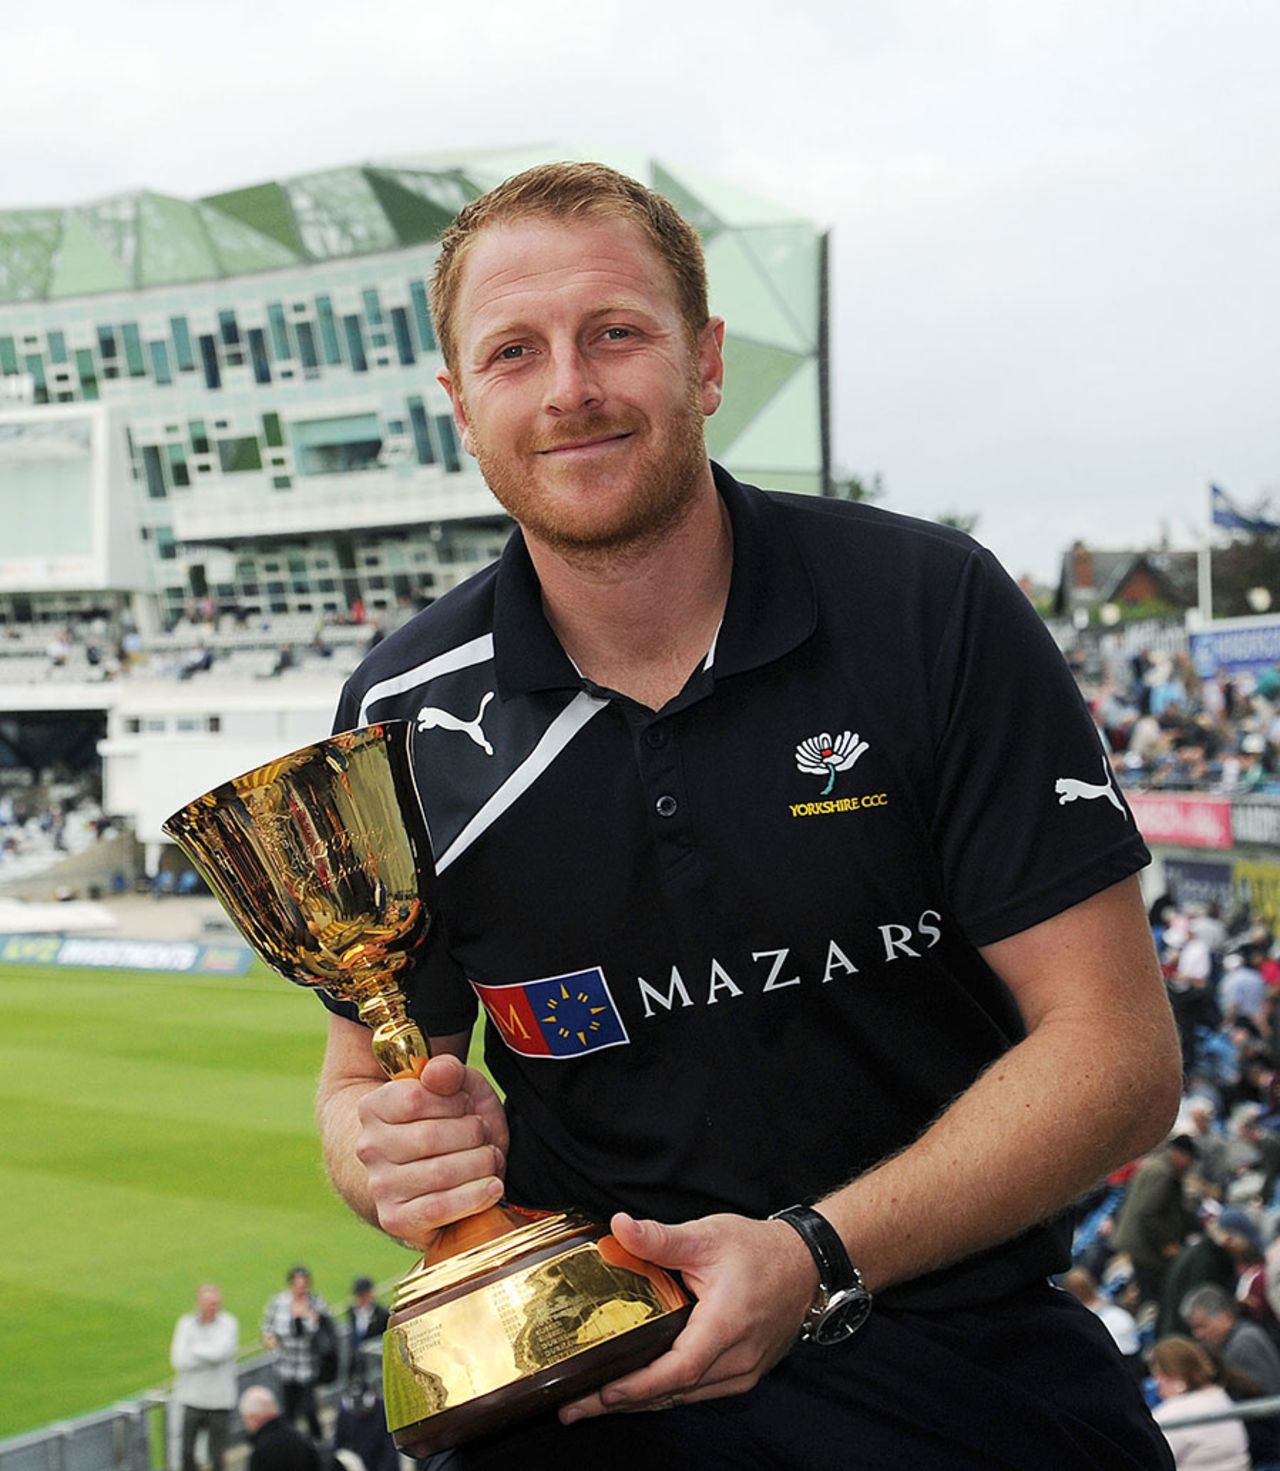 A defiant Andrew Gale holds the Championship trophy at Headingley, Yorkshire v Somerset, County Championship Division One, Headingley, 1st day, September 23, 2014